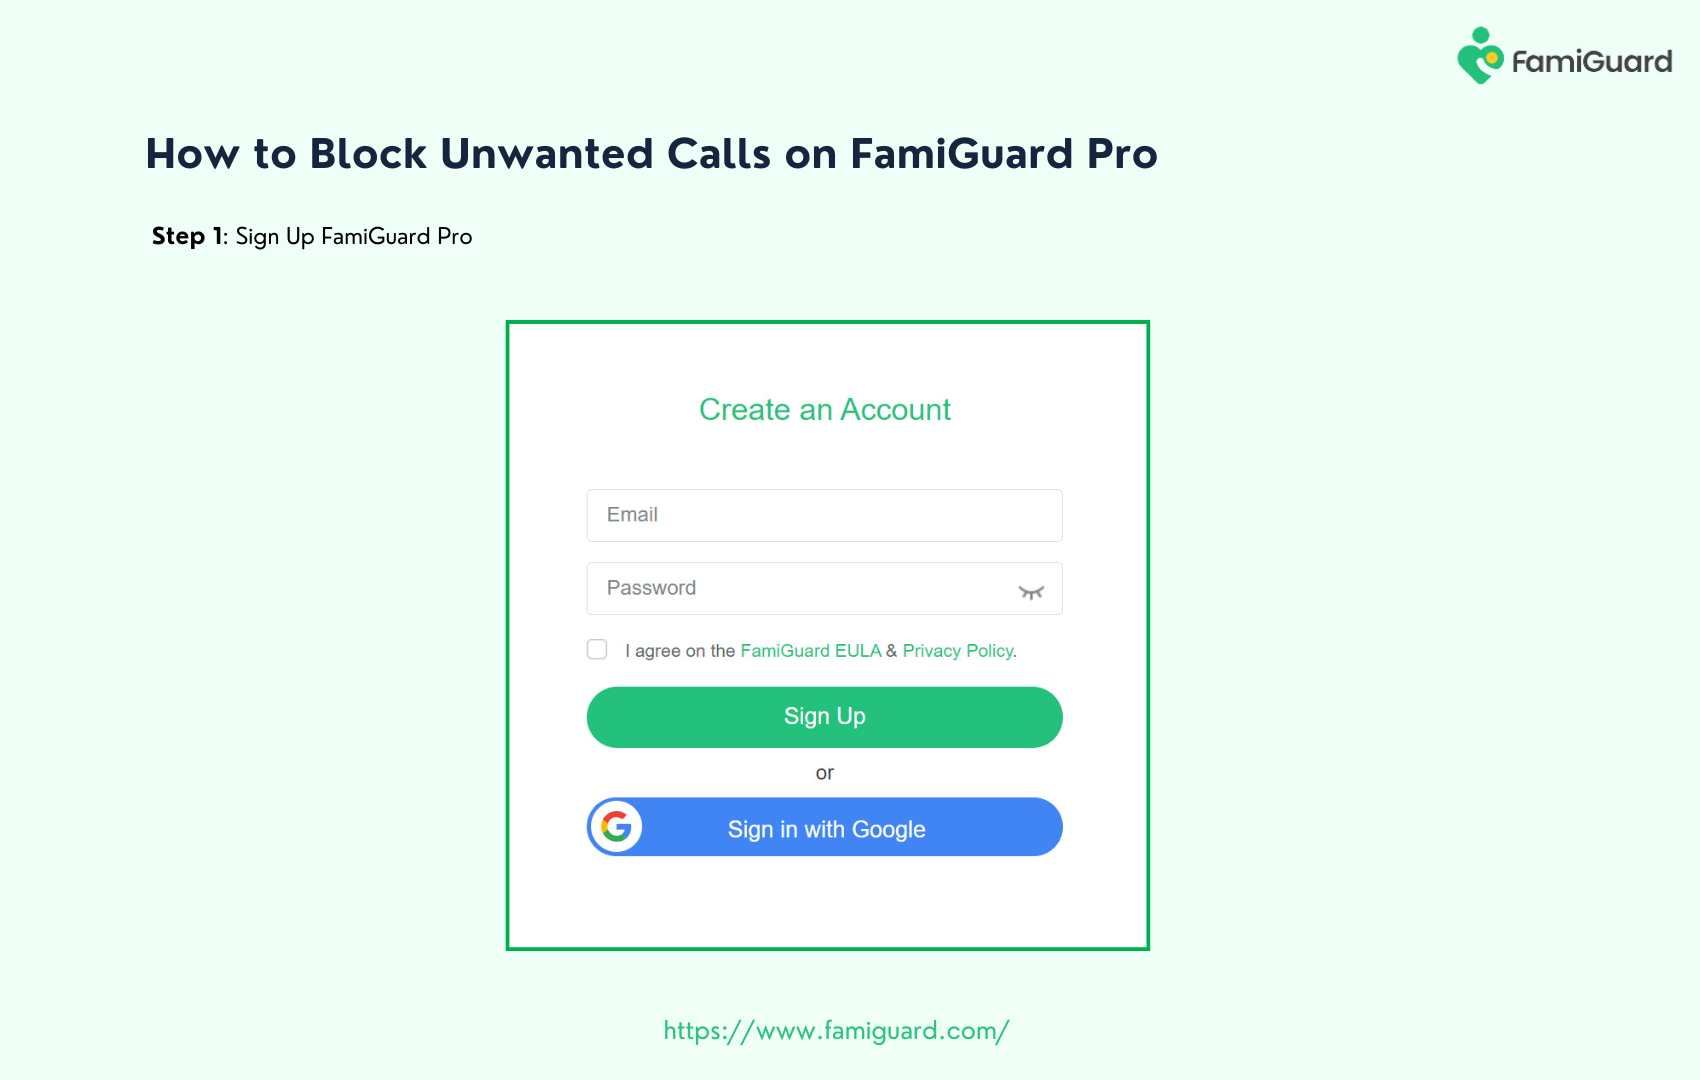 Sign Up FamiGuard Pro